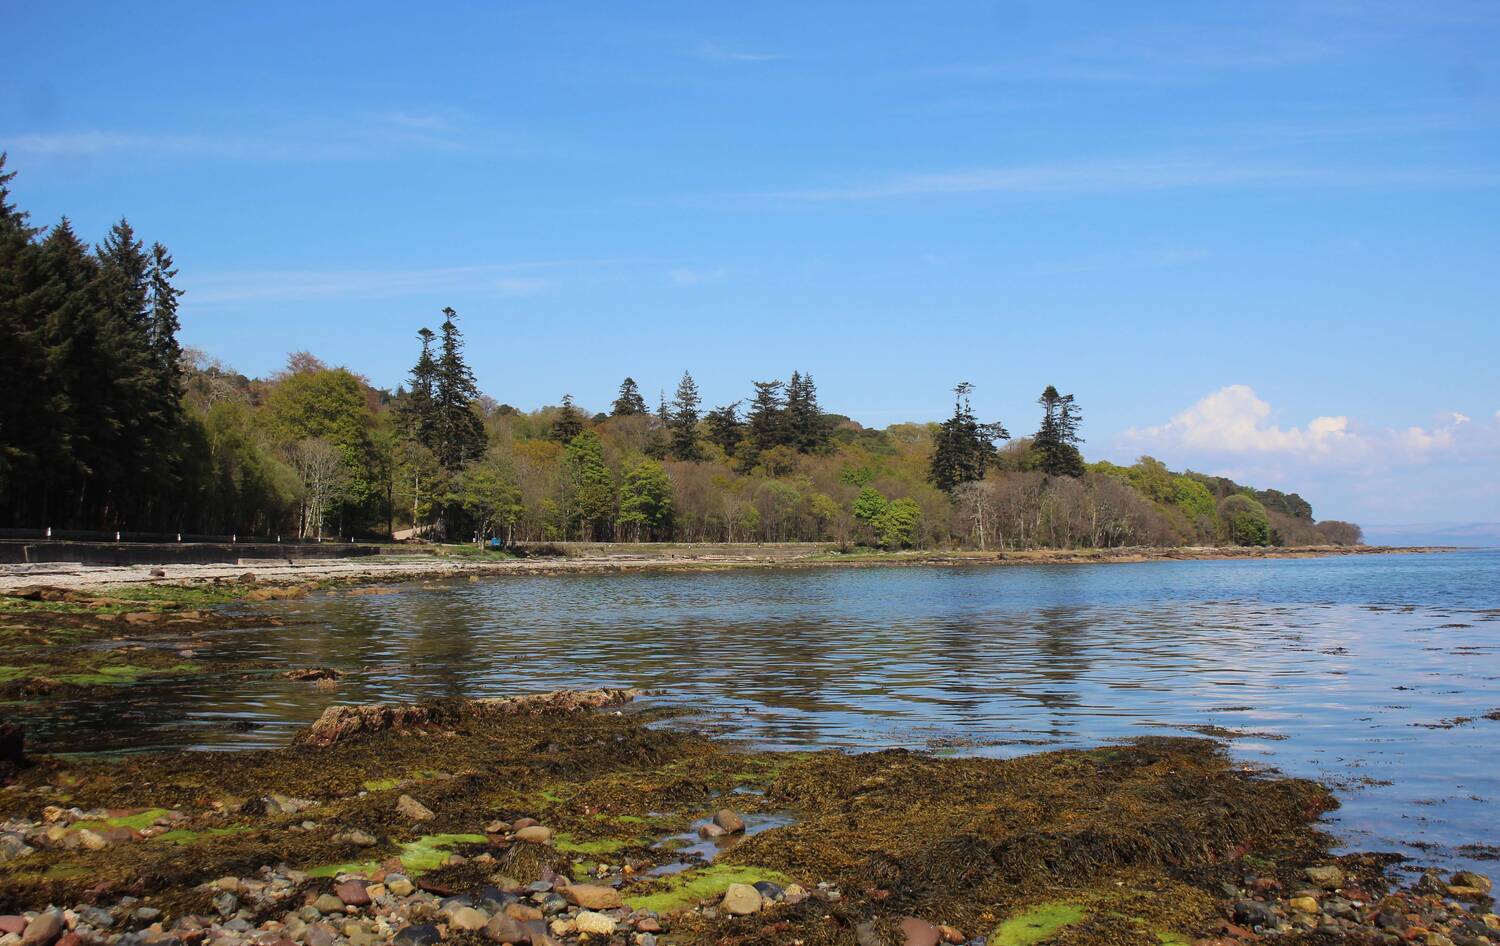 Rocky shorelines with trees in the background